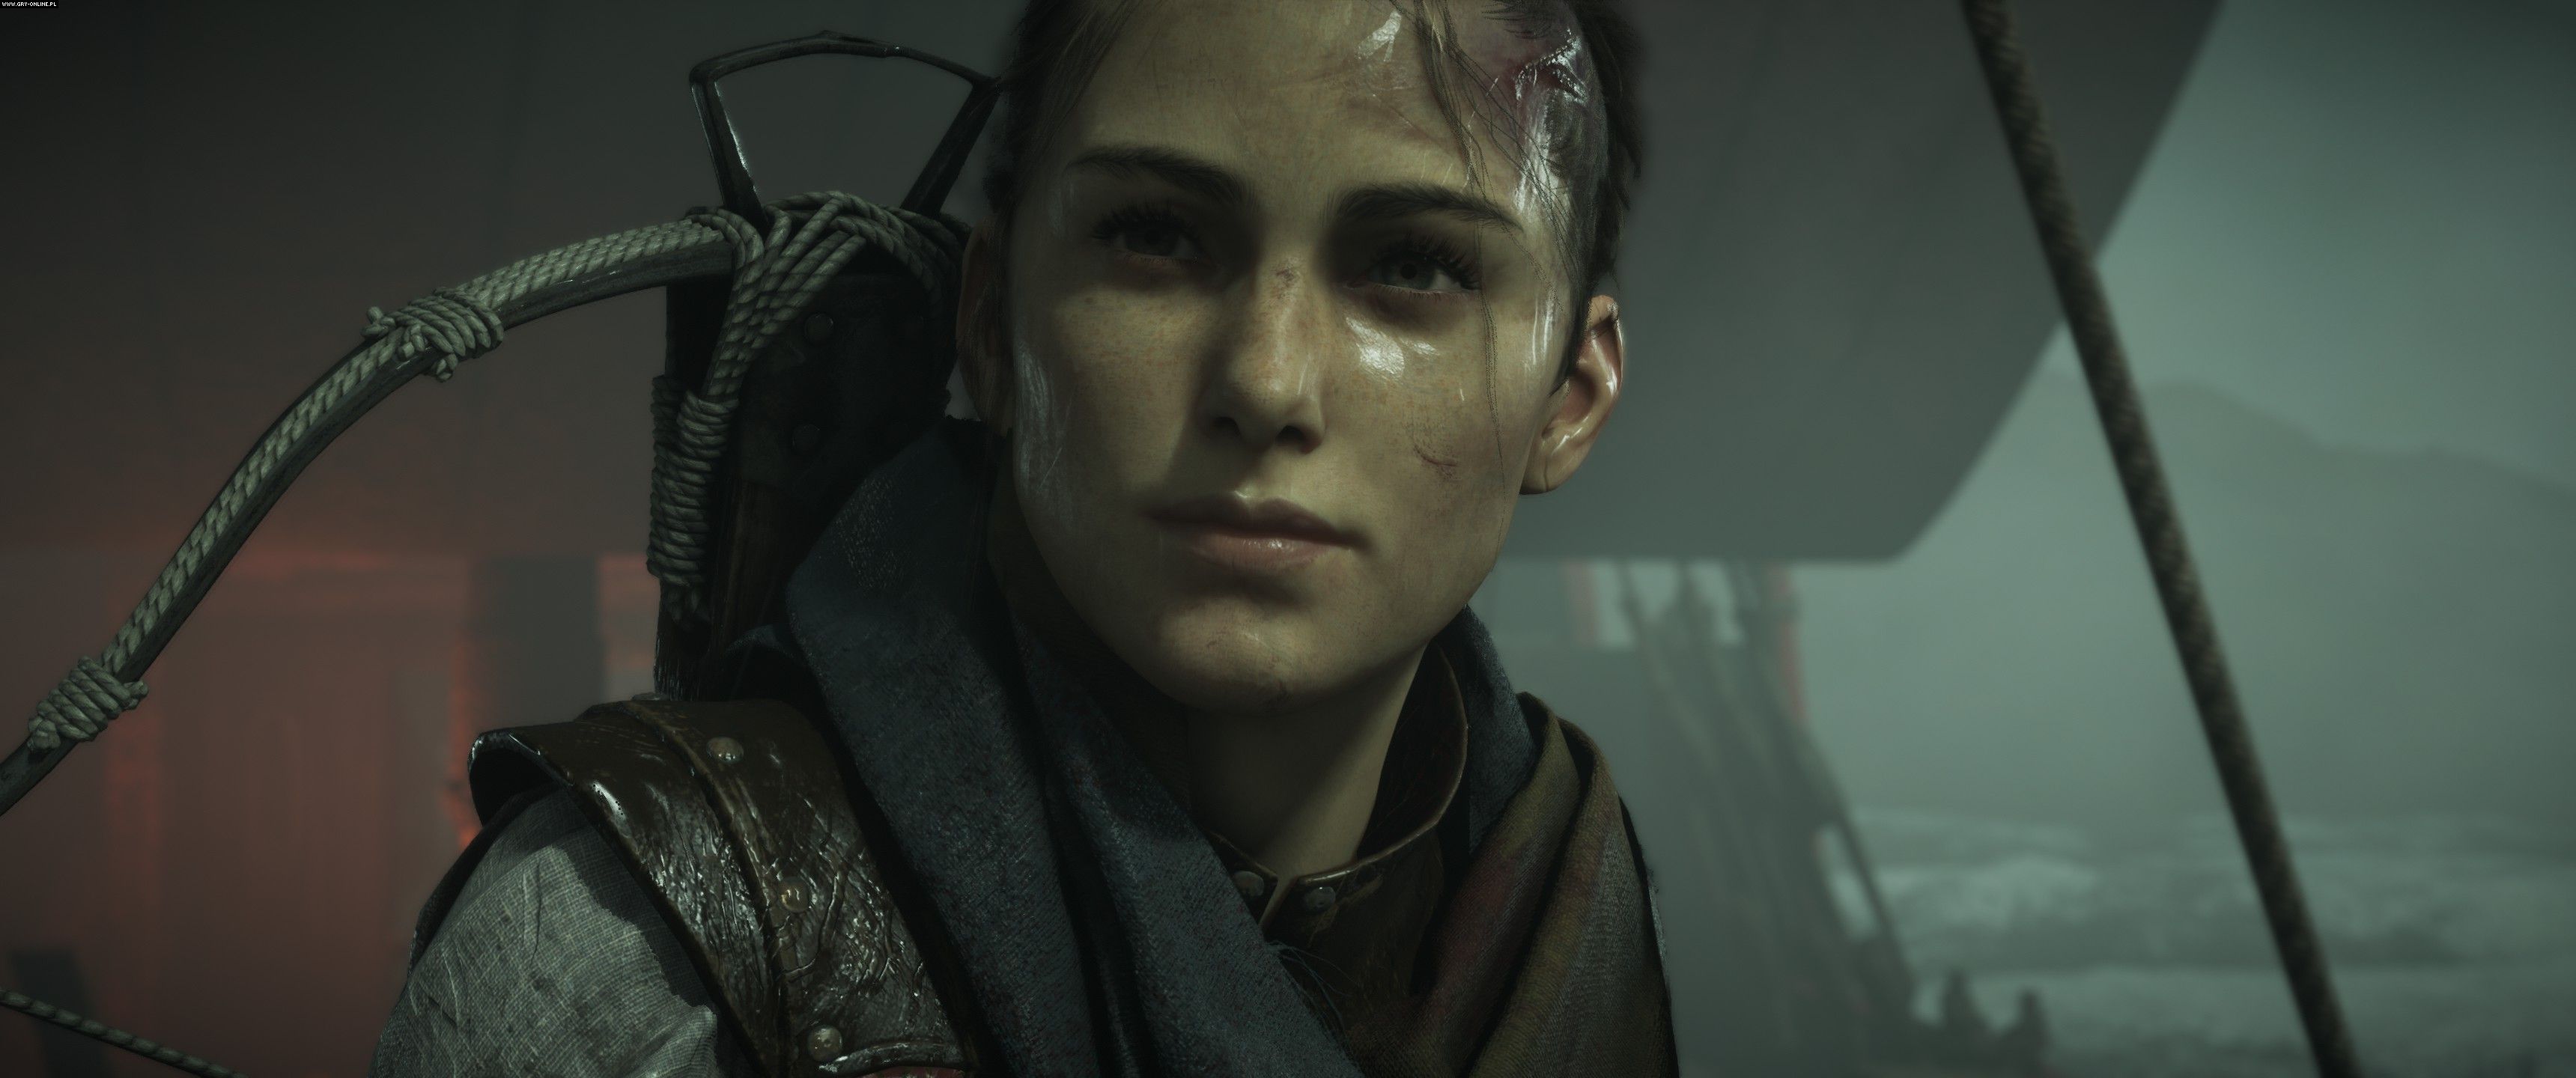 A Plague Tale: Requiem will be a viable alternative to The Last of Us